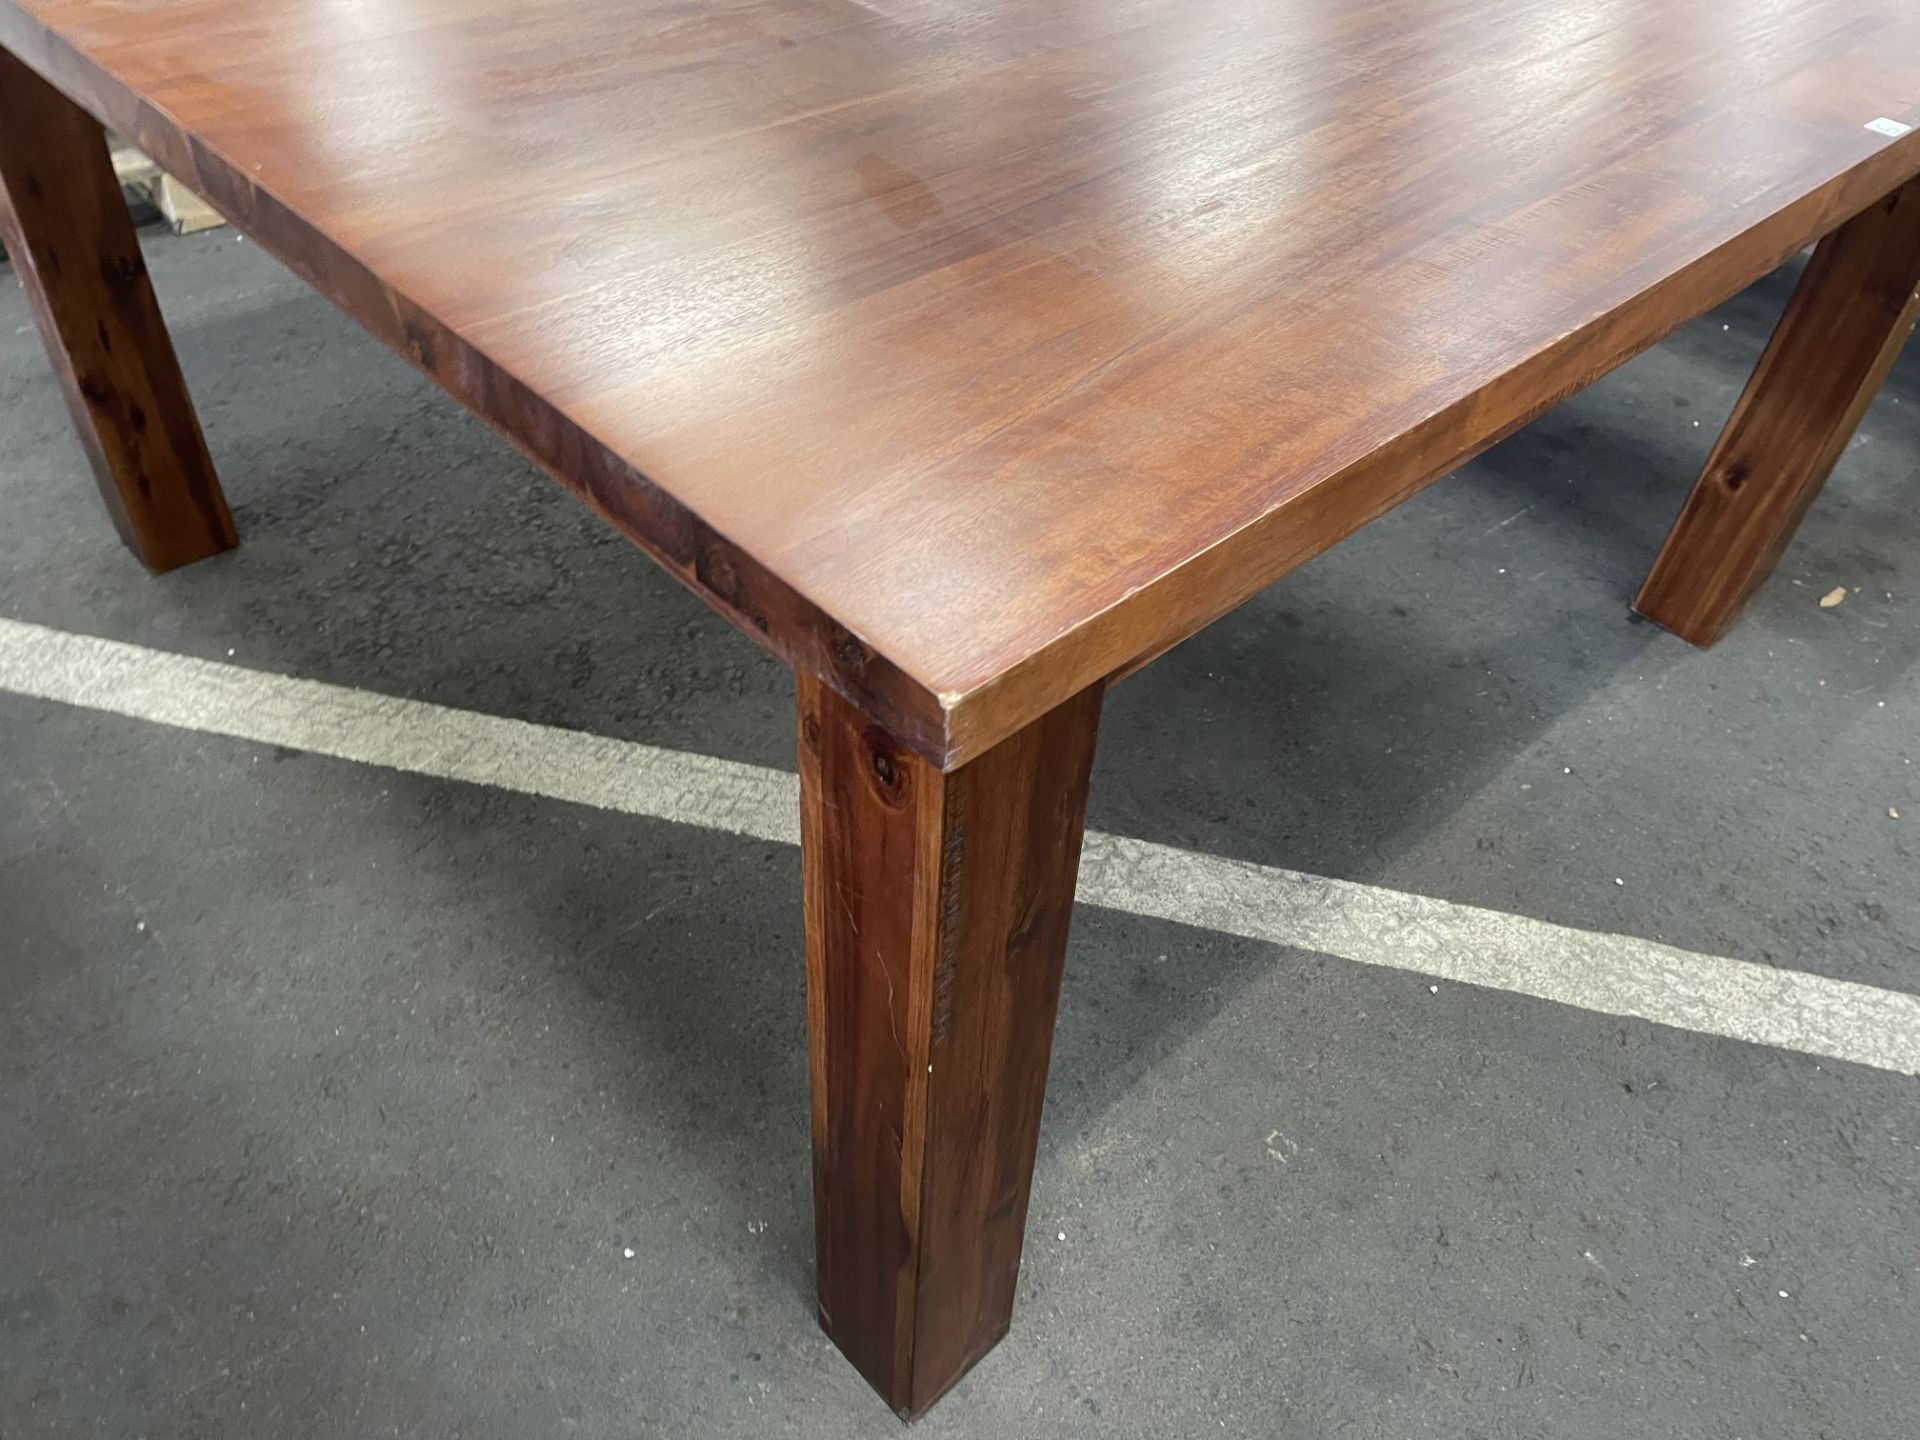 Dunelm 150cm Square Dining Table (Damaged) - Image 3 of 4